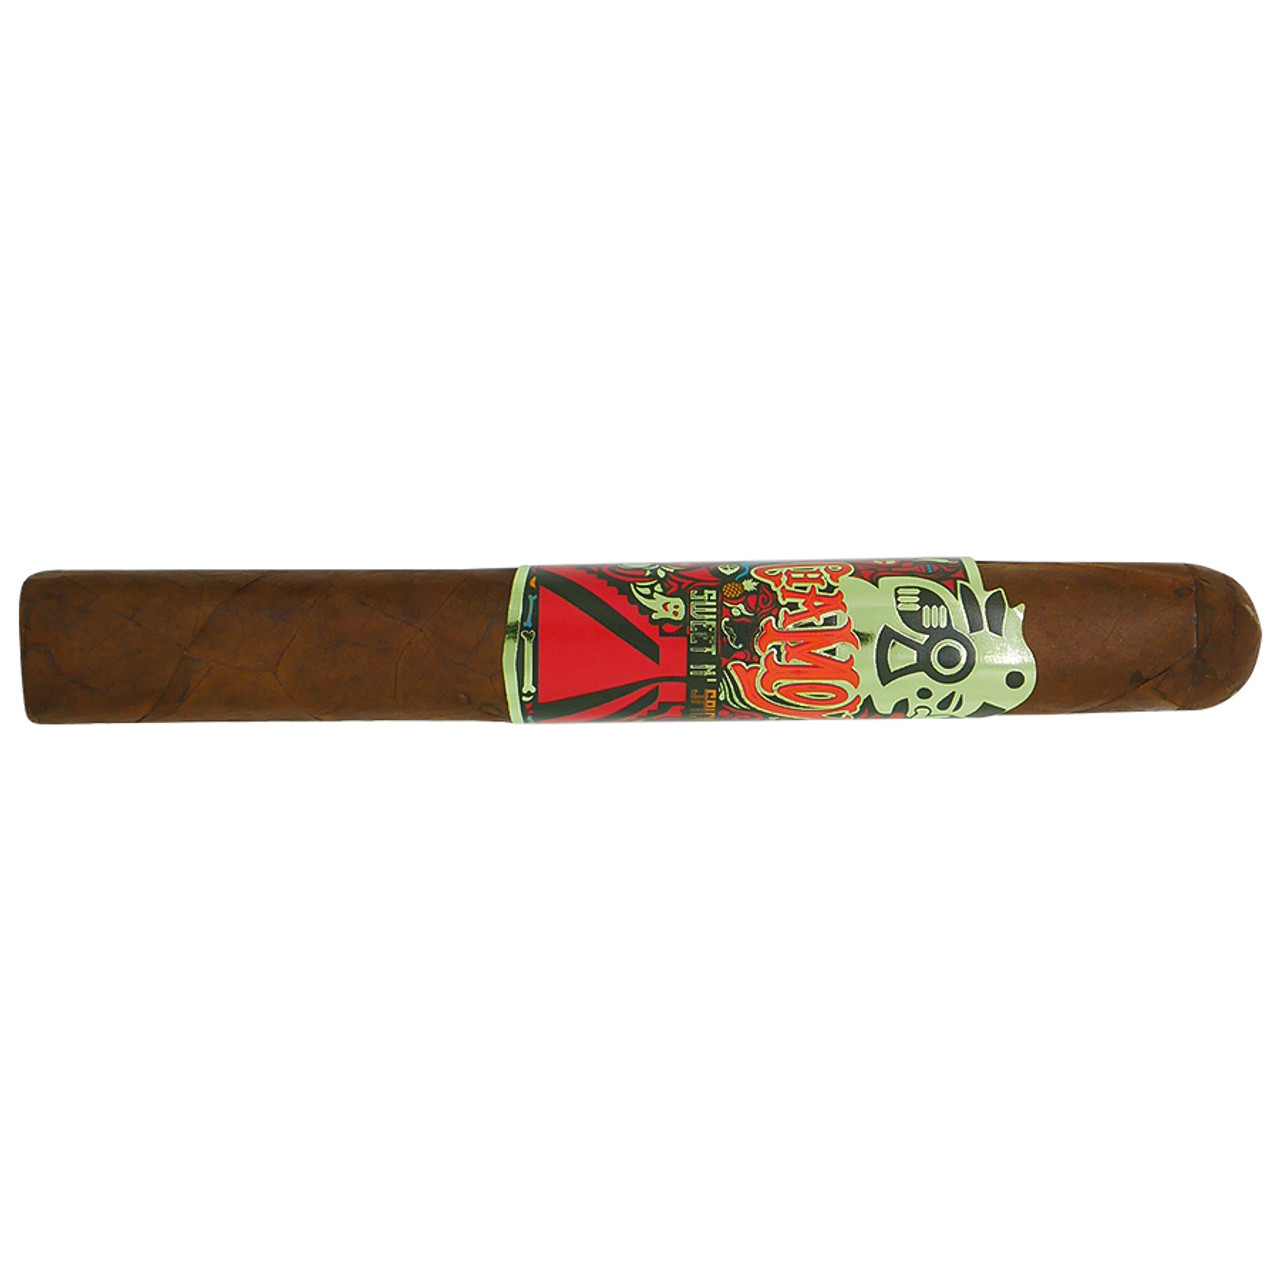 MAx'S Cigars ®️ (@maxscigars) • Instagram photos and videos